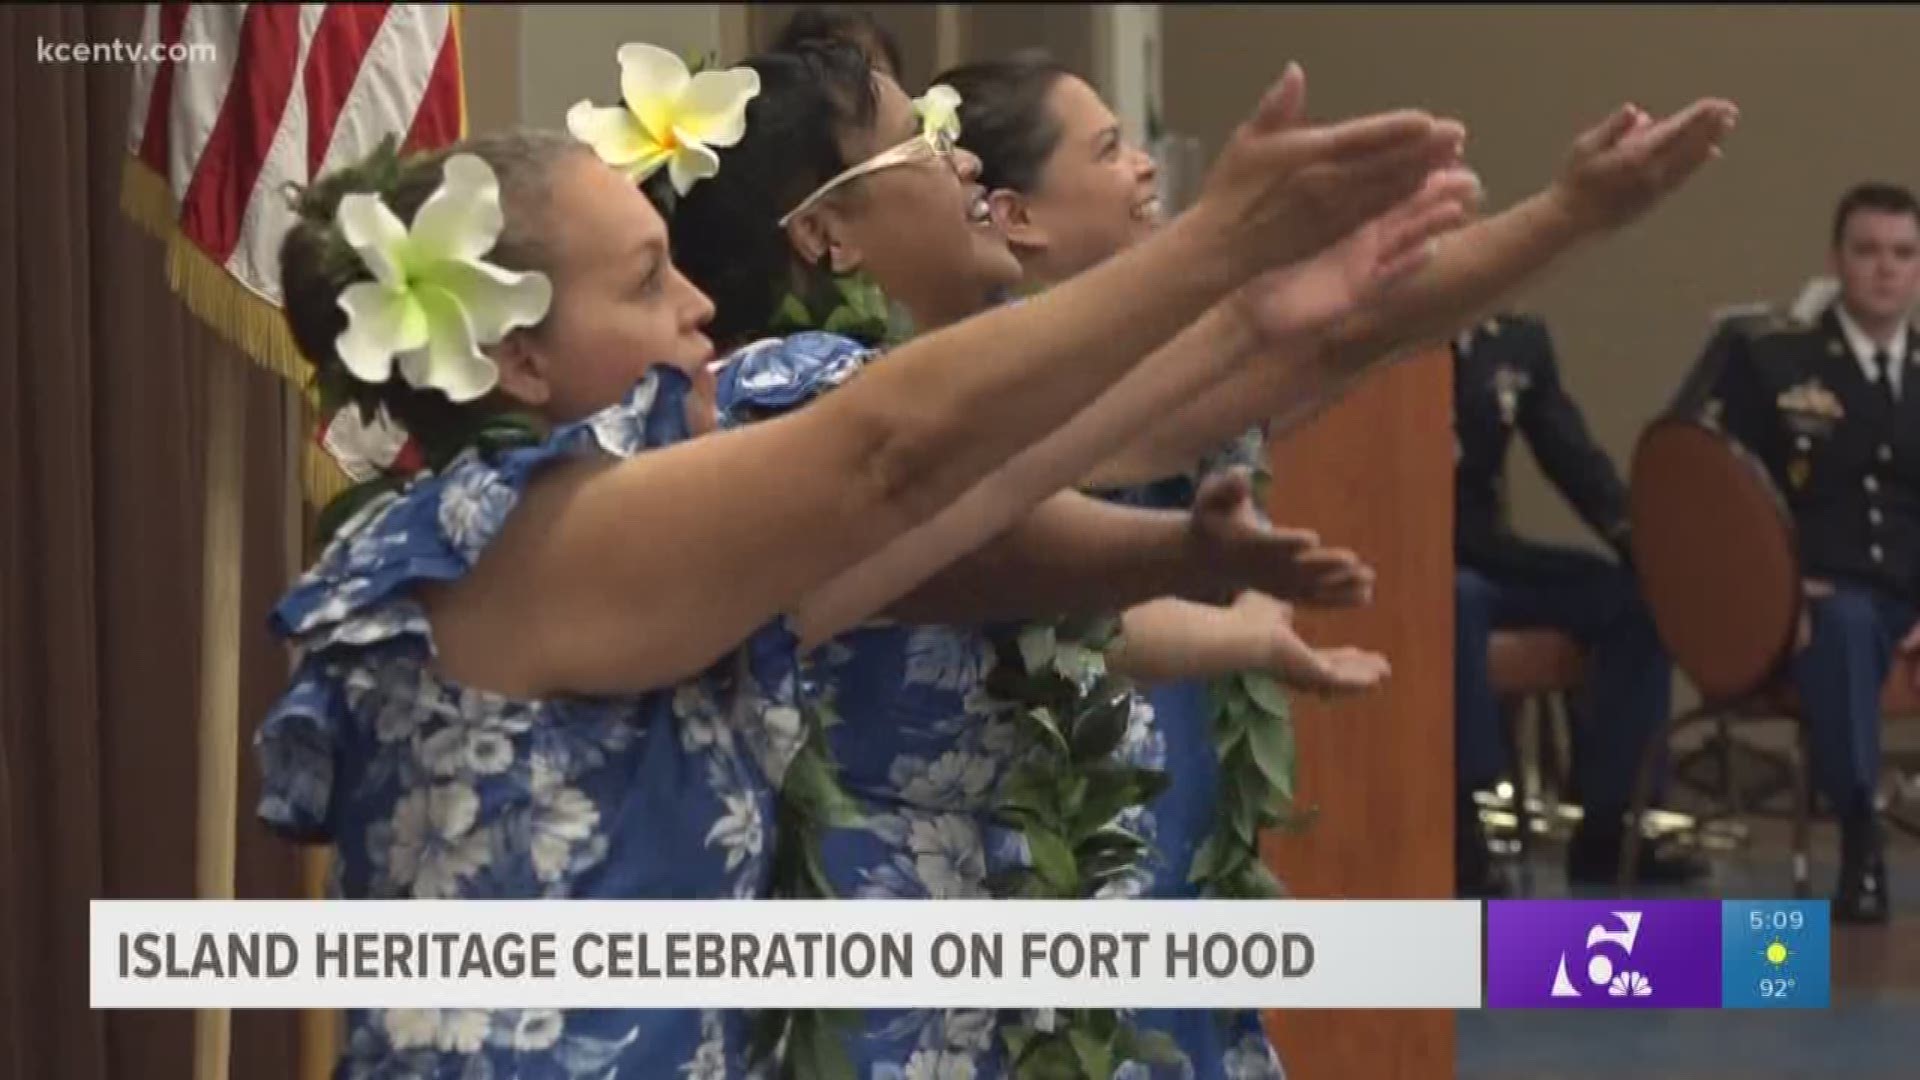 Fort Hood recognizes the contributions and sacrifices of the Asian American Pacific Islanders who serve in the Army.